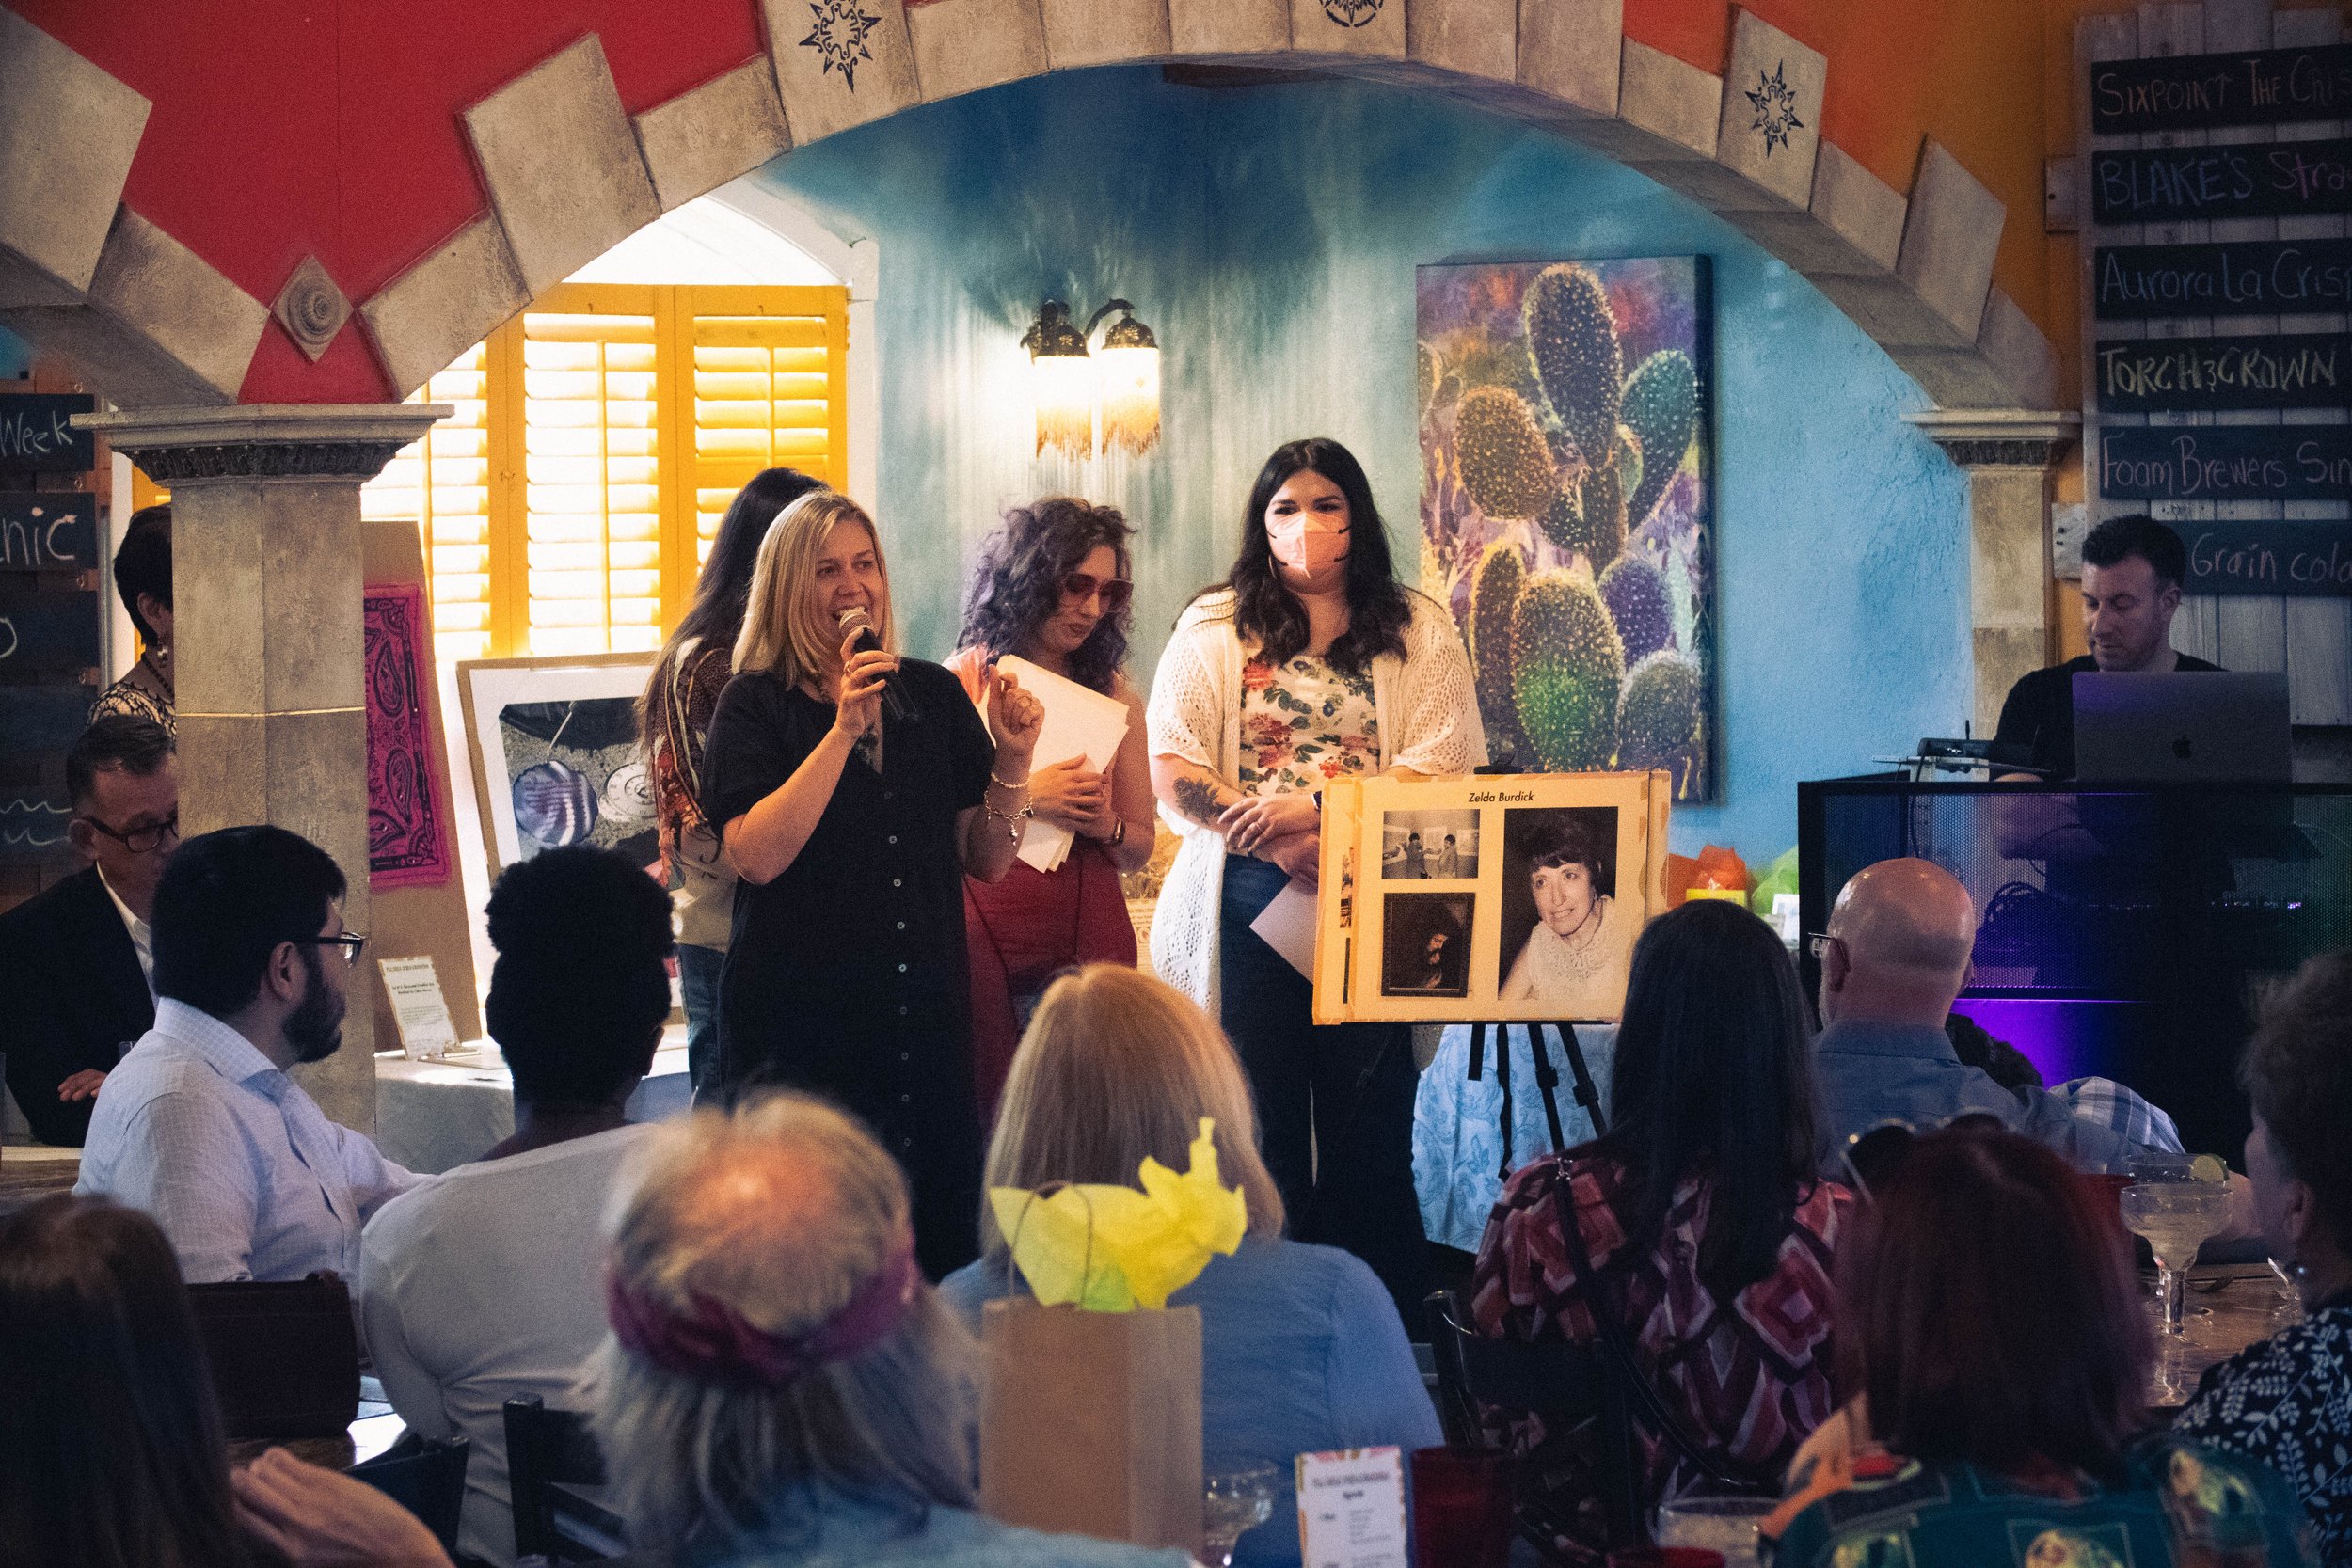  In front of the auction items displayed, Gianna Seaman, Rachel Heberling, and Lindsey Knipe are standing side-by-side as family member of Zelda Burdick (Shanna Hospelhorn) is addressing the seated attendees through a microphone. 